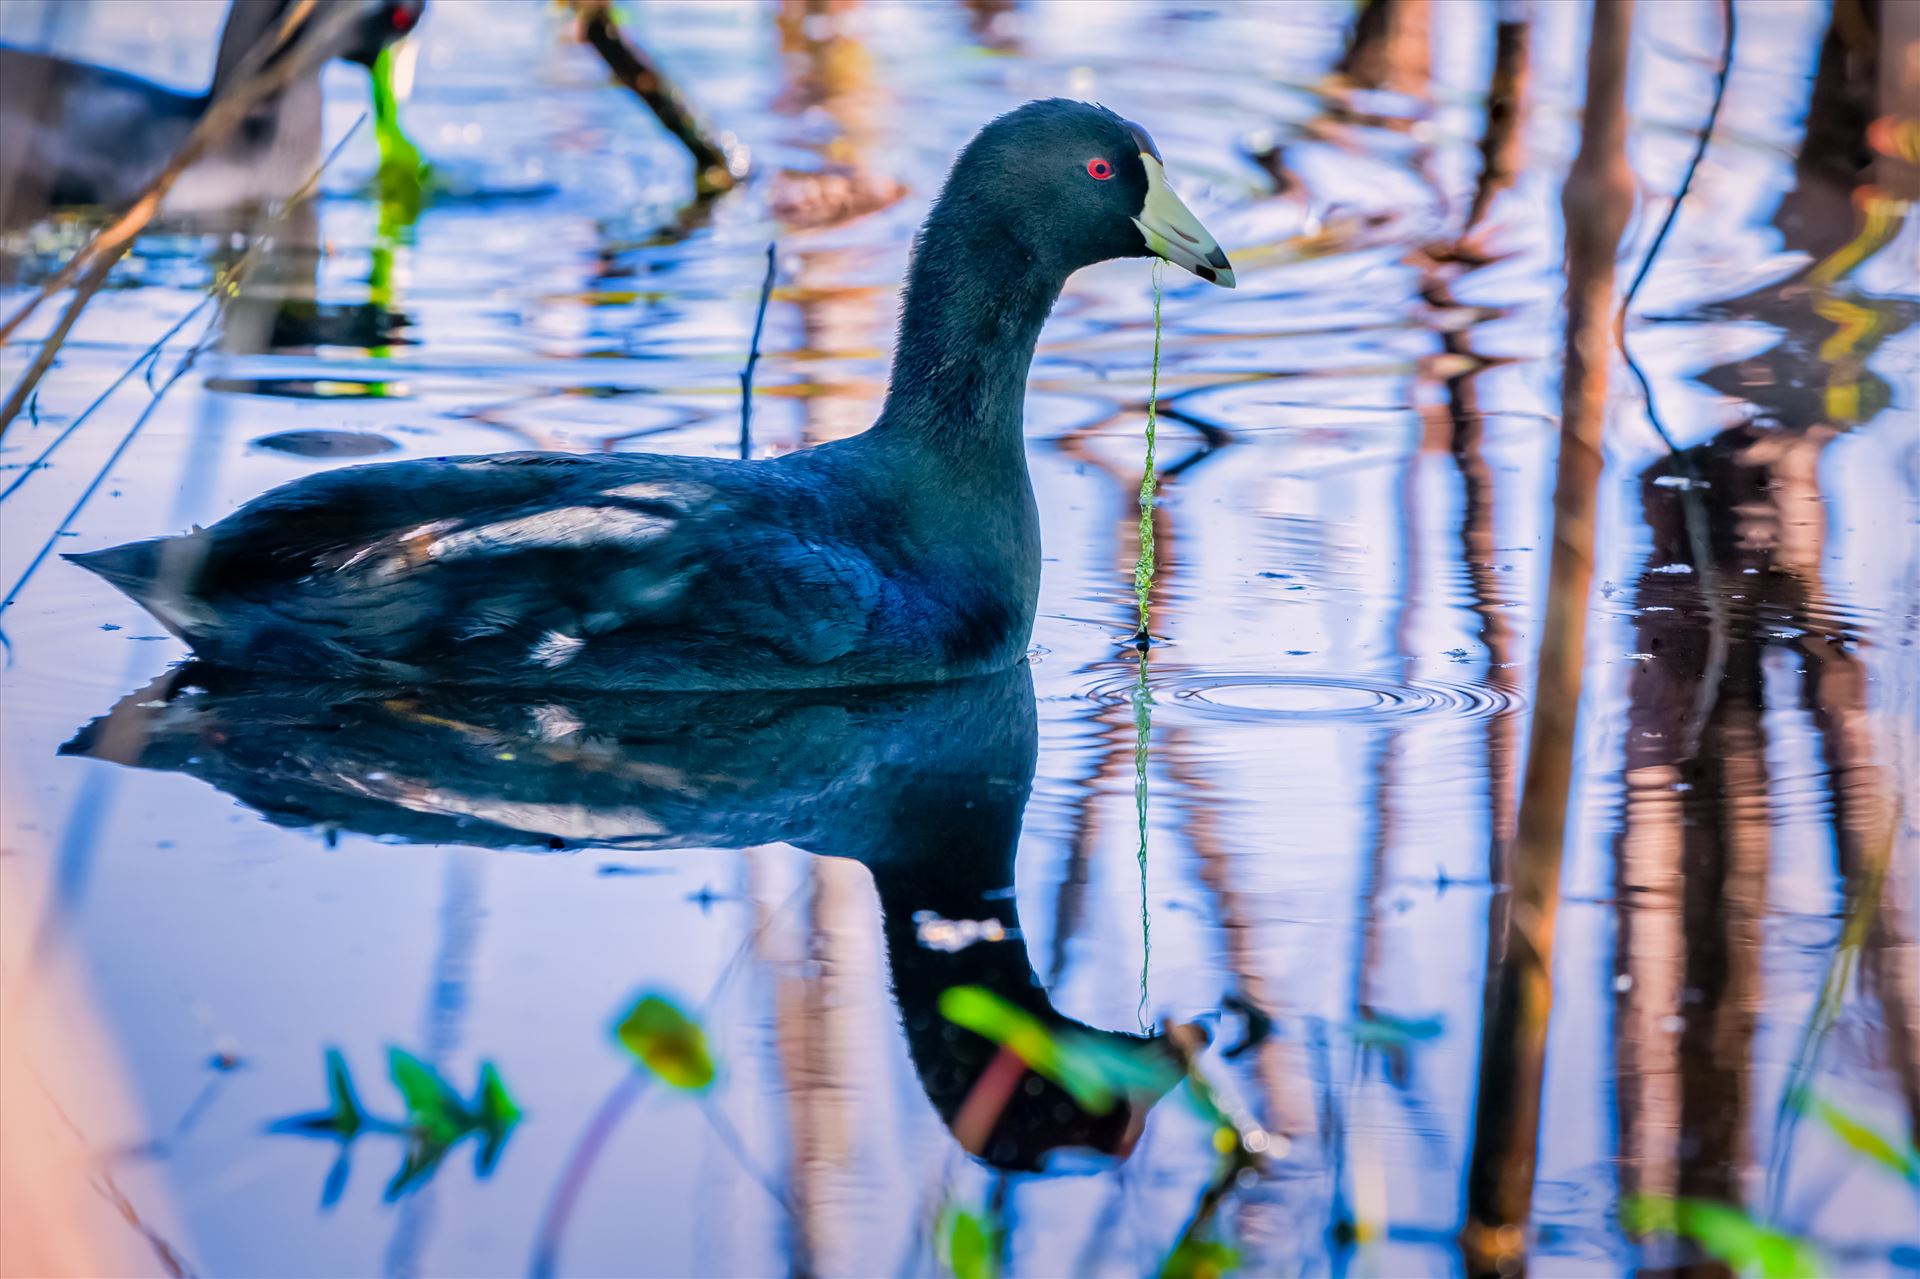 American Coot - American Coot in gator lake at St. Andrews State Park, Panama City, Florida by Terry Kelly Photography